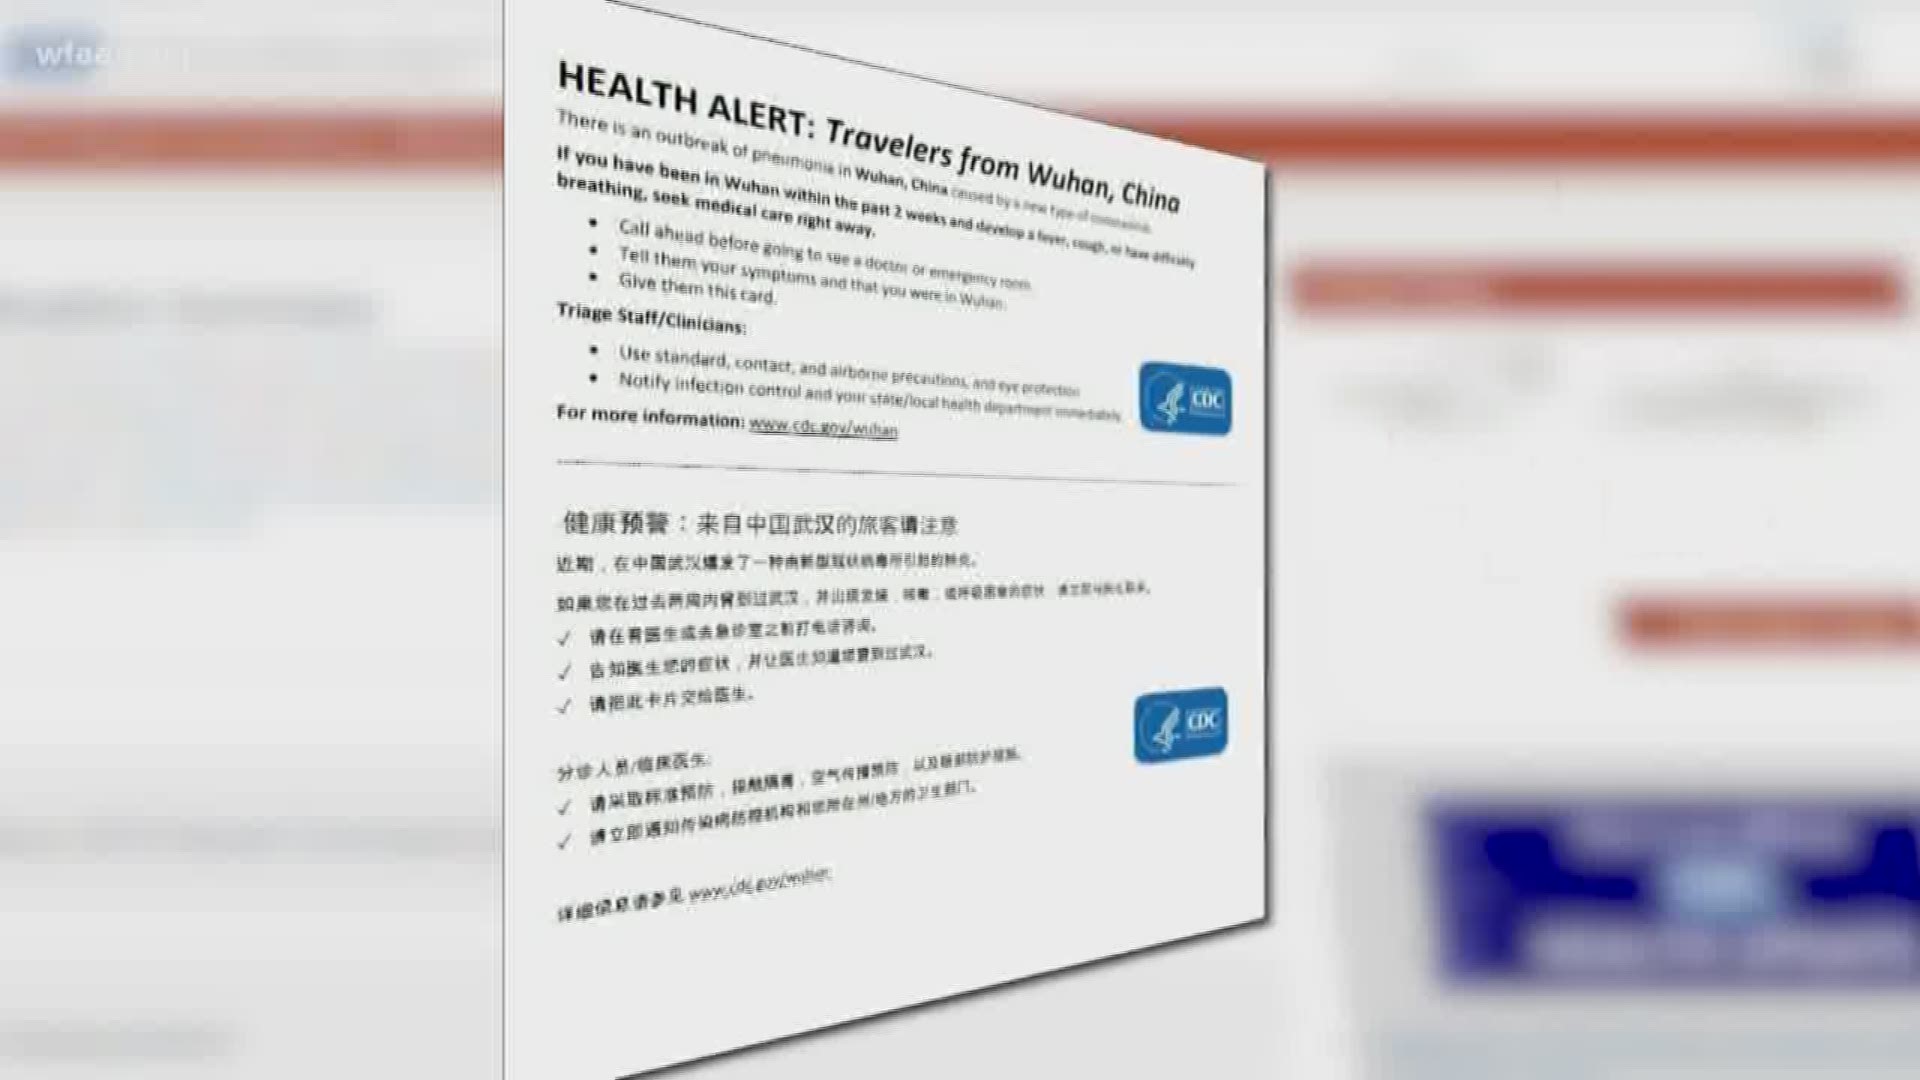 Health officials say the most distinguishing factor of this strain of coronavirus is travel to Wuhan, China. o